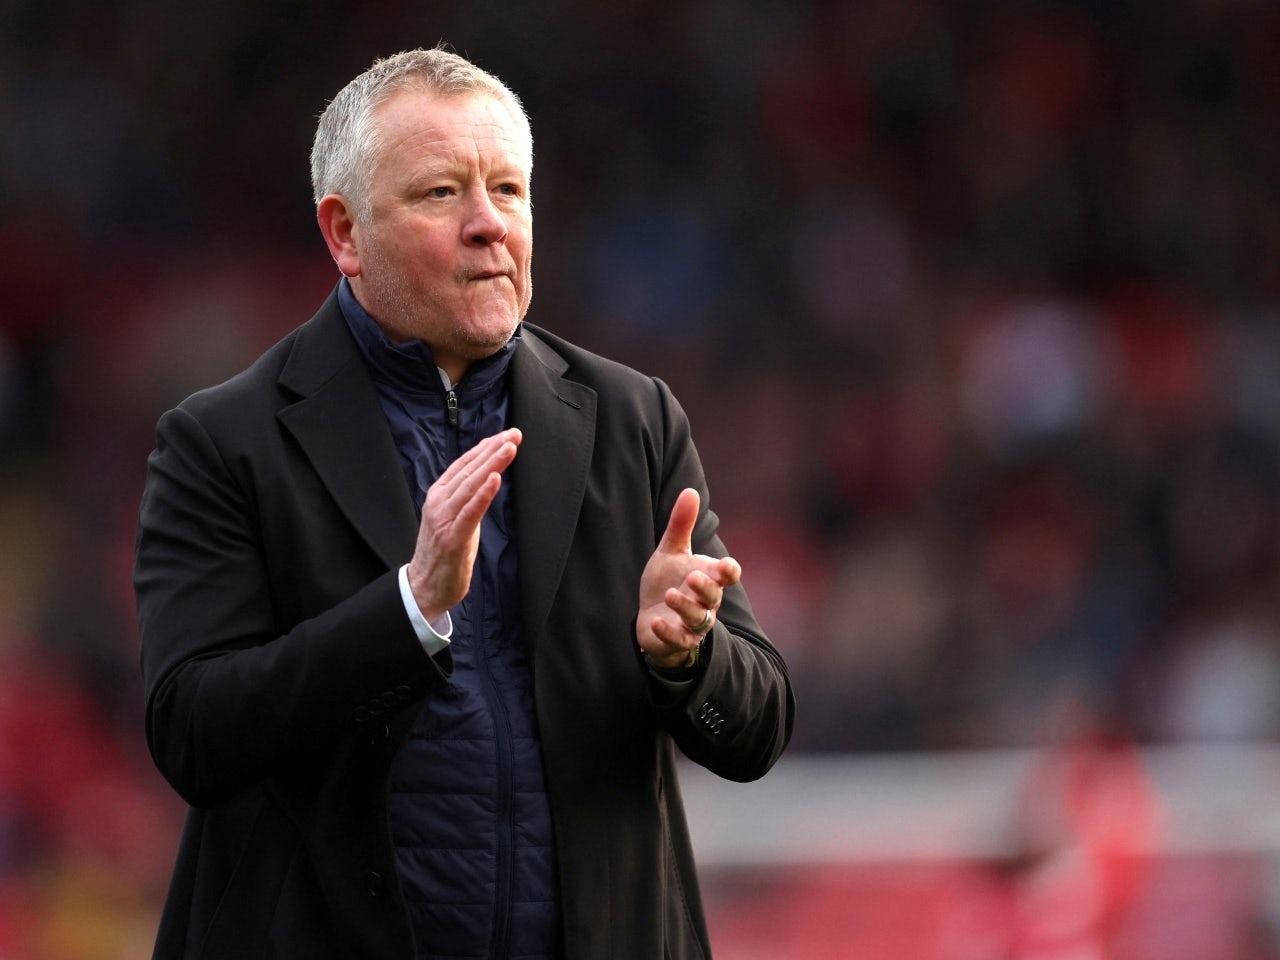 Middlesbrough's Chris Wilder hits out at Burnley speculation